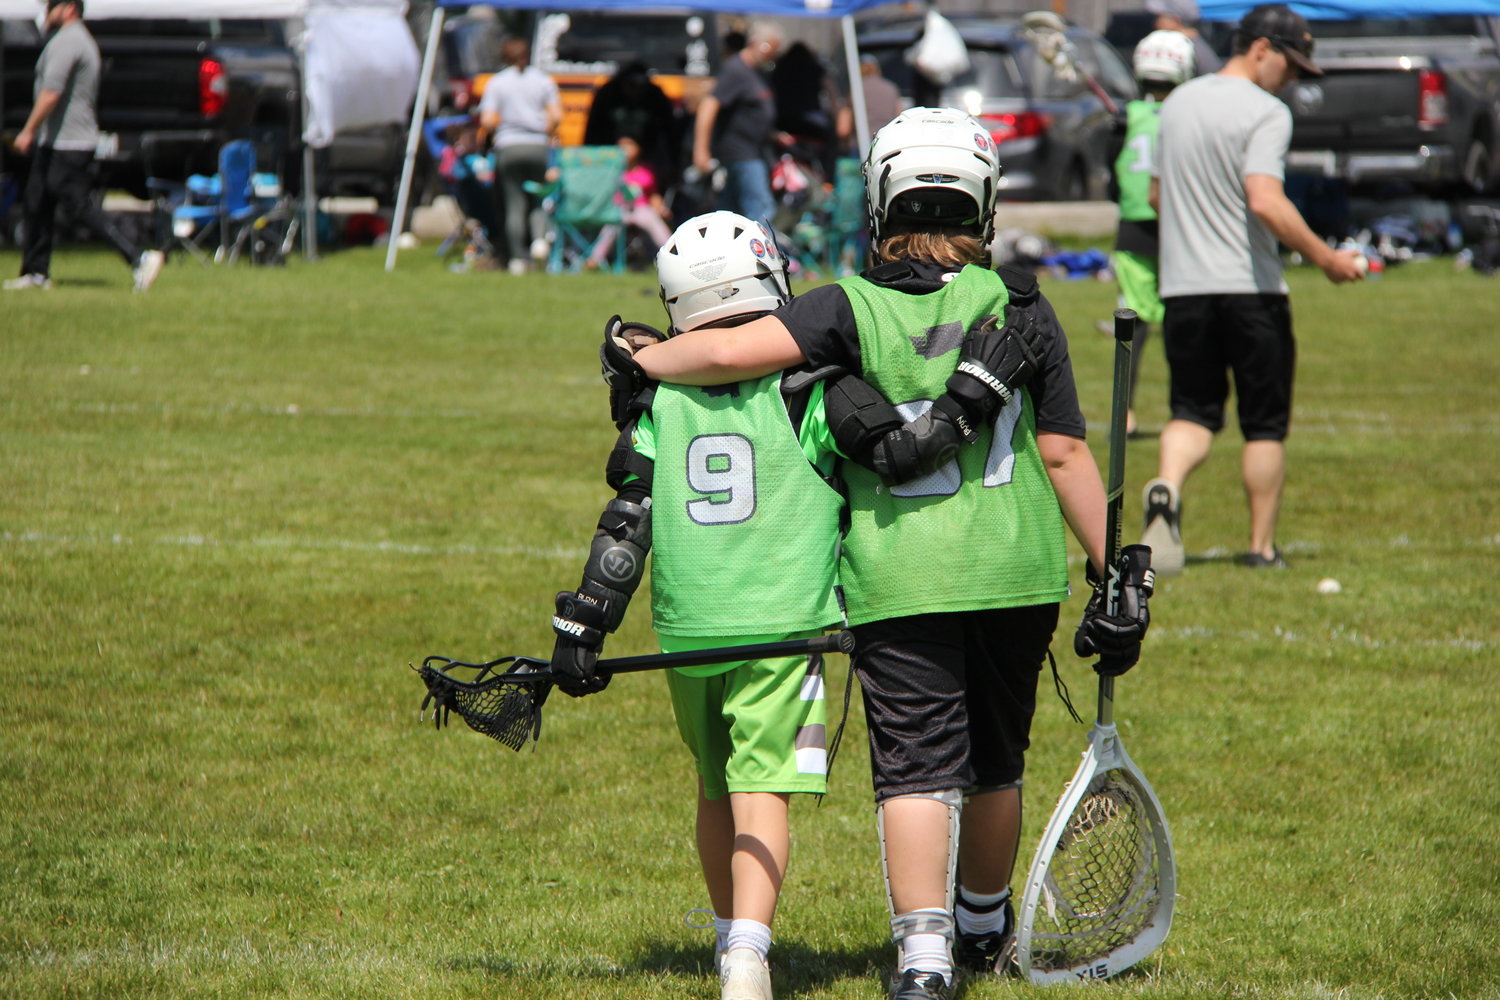 Twin Cities Lacrosse provided this photo of a competition during a previous season.